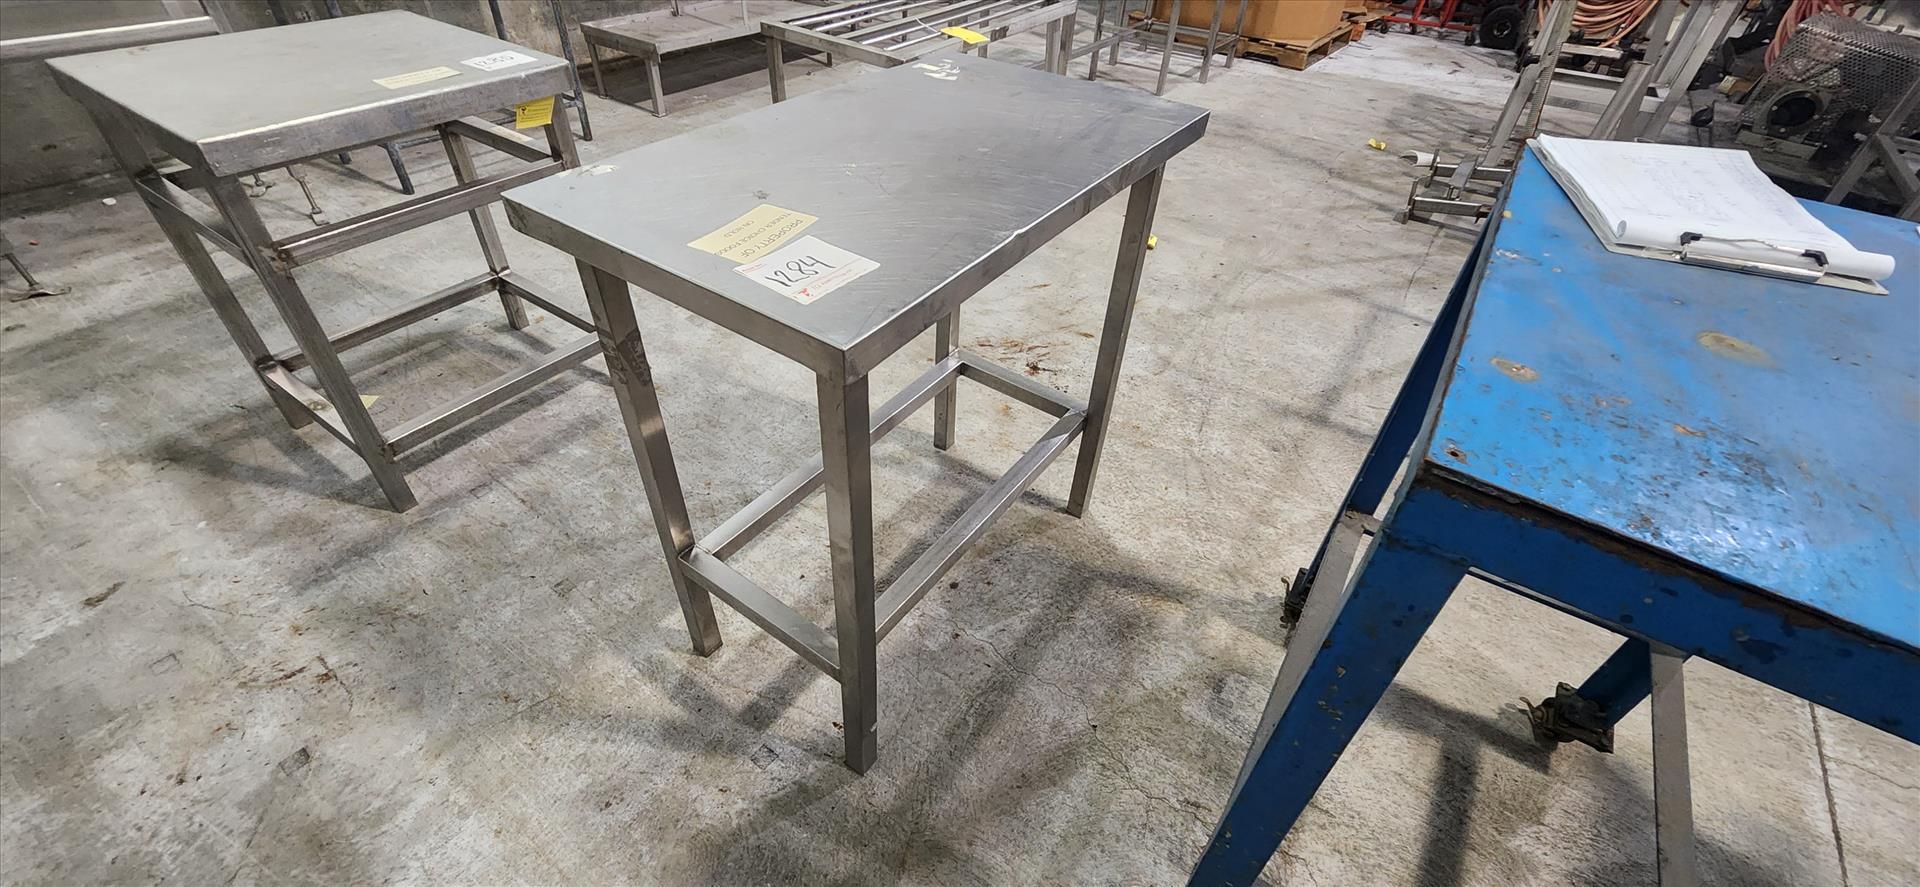 table, stainless steel, approx. 19 in. x 34 in. [TAG 1284 - LOC Brockley Dr.]